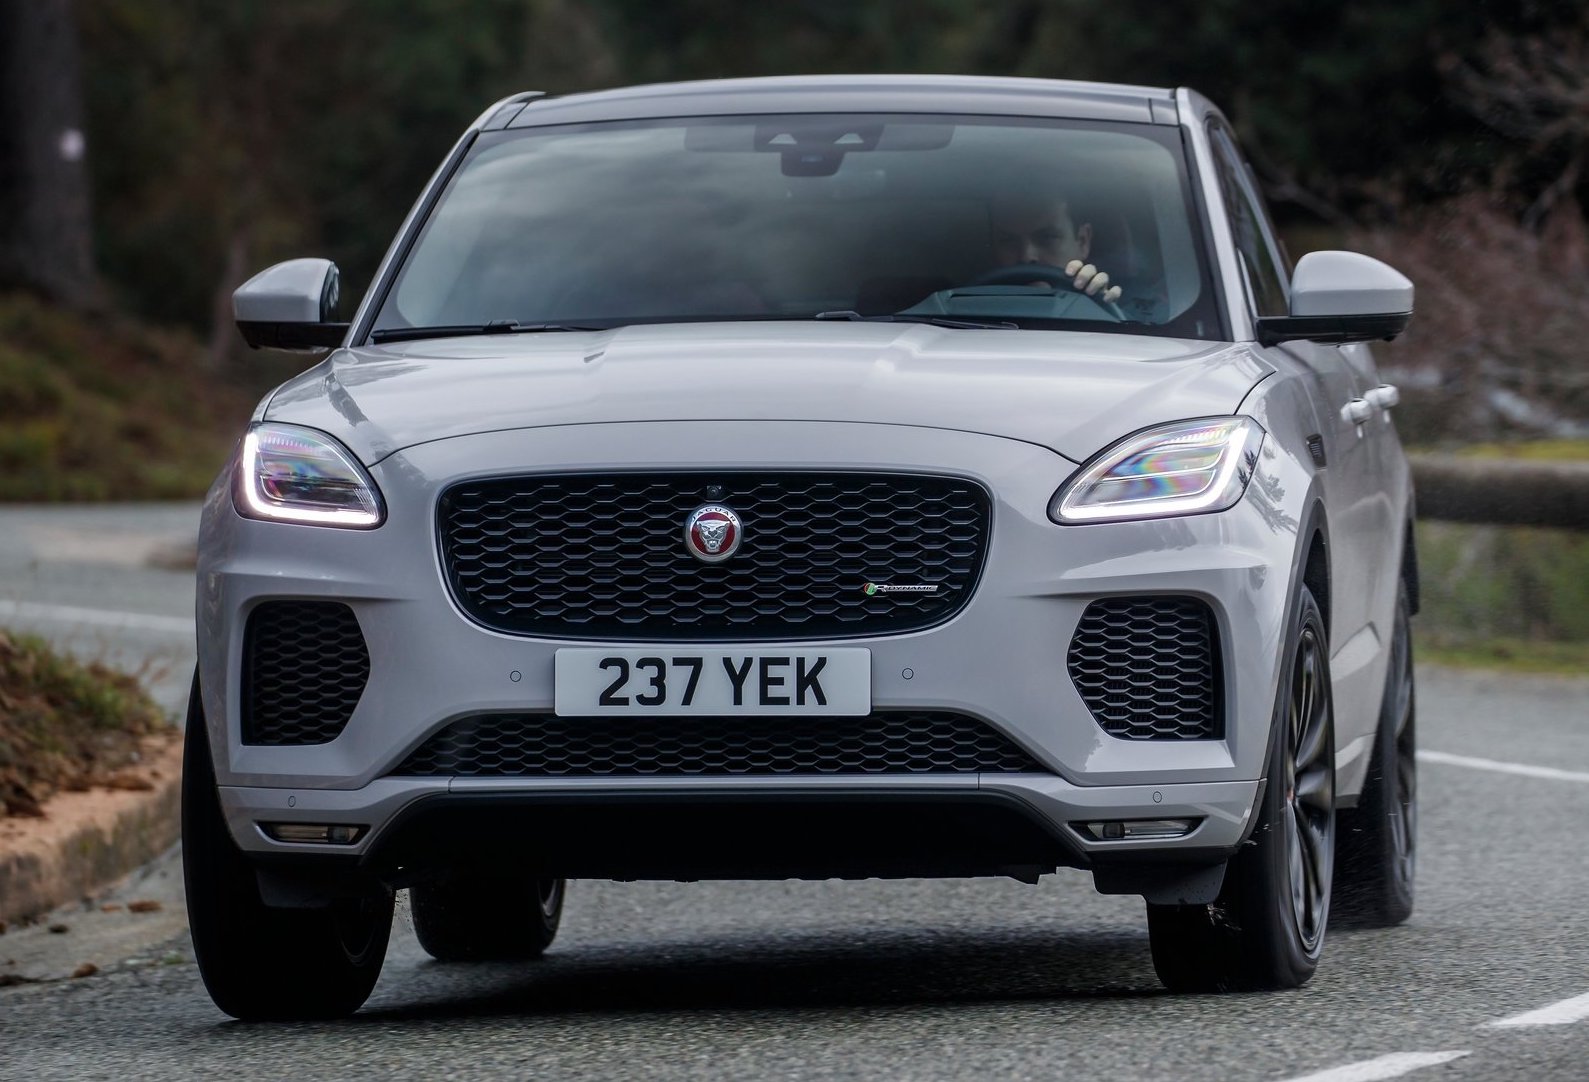 Jaguar C-PACE trademark found, for new coupe SUV?